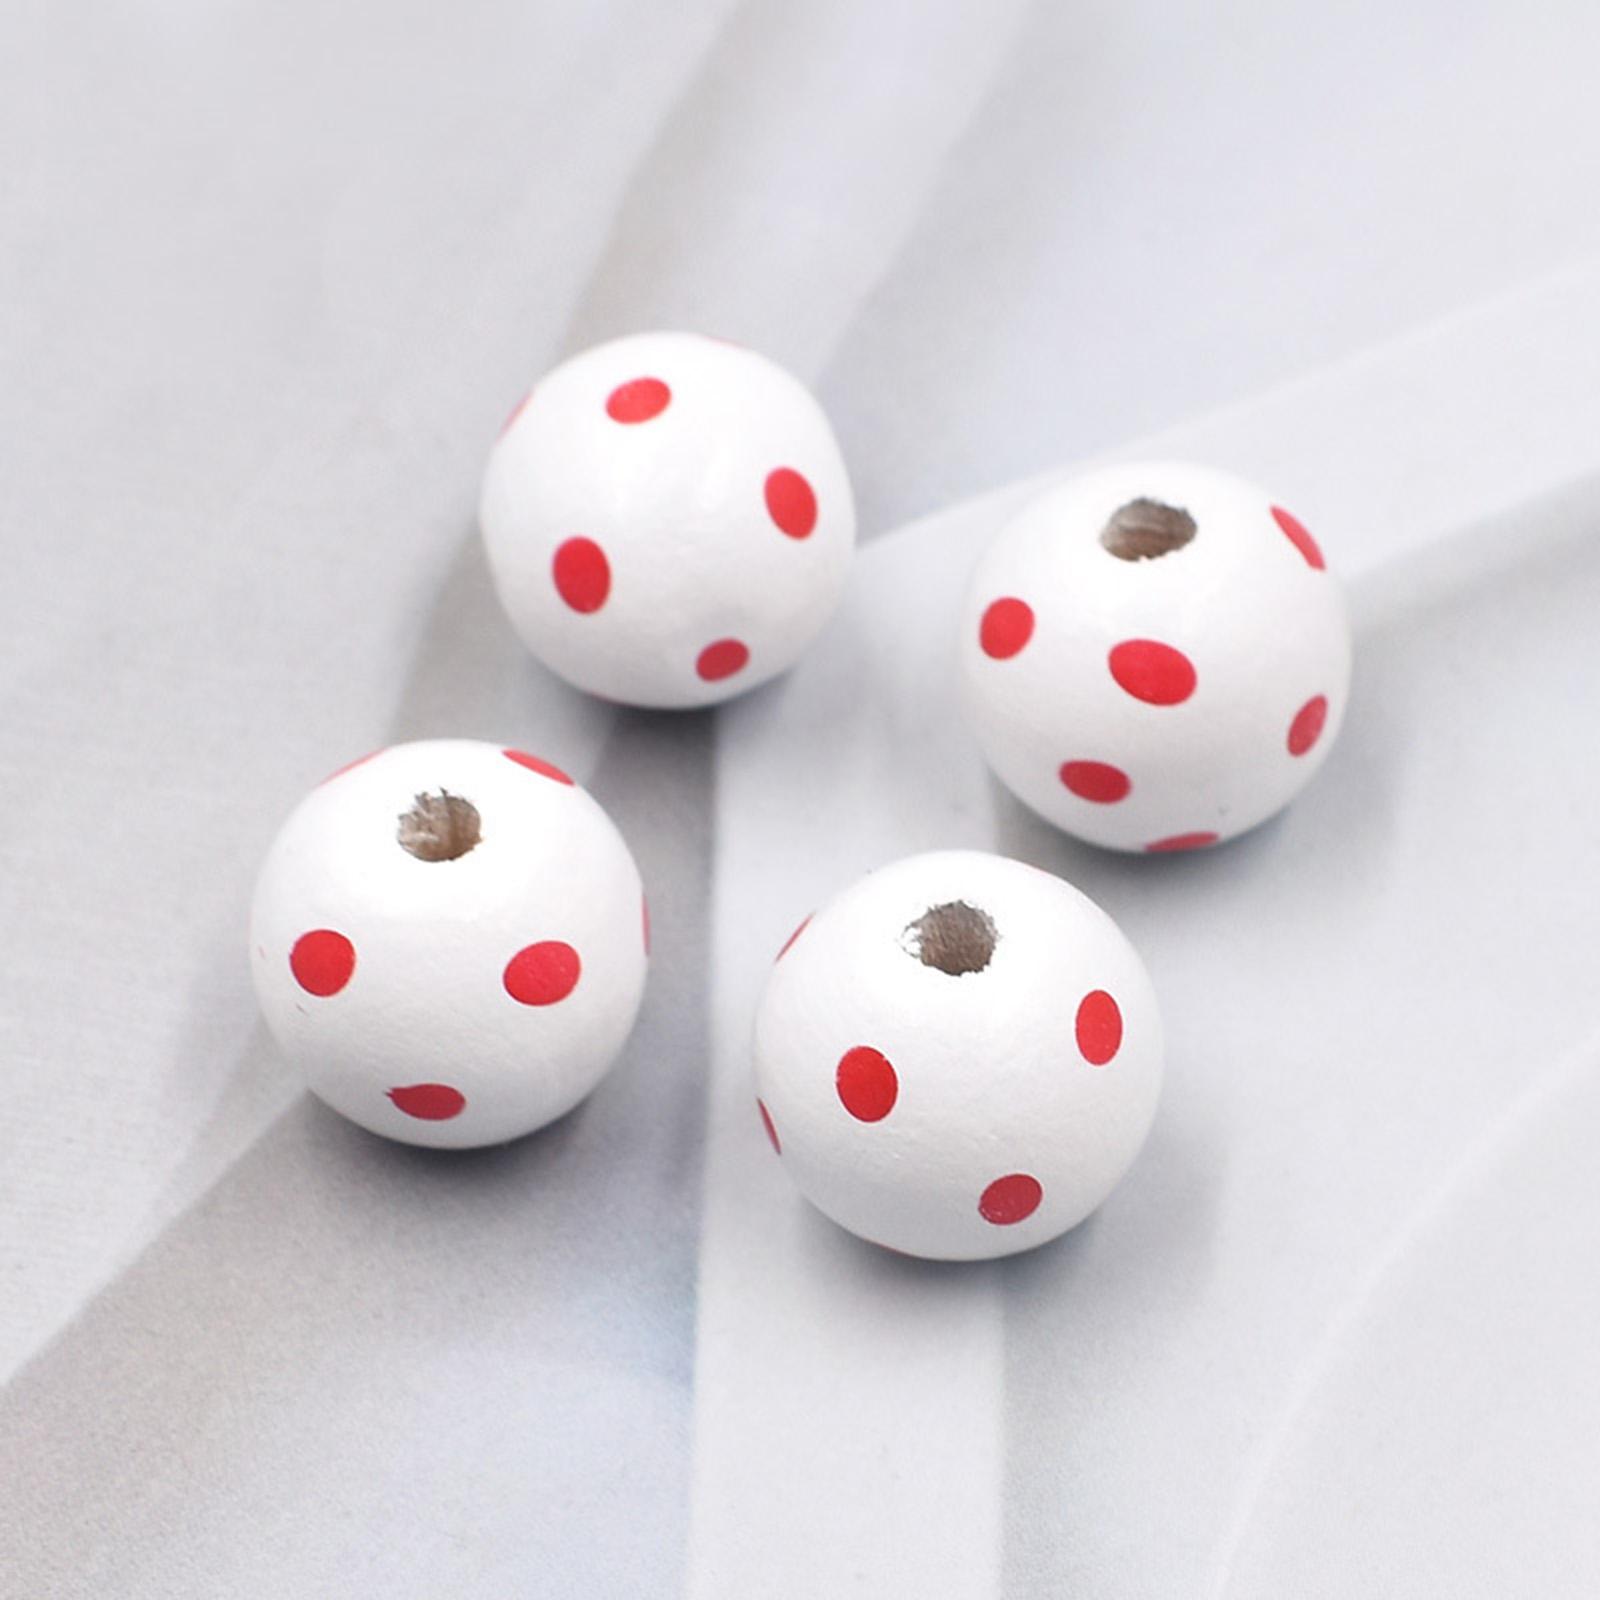 60 Pieces 16mm Wood Polka Dot Round Beads for Jewelry Making Mix Supplies